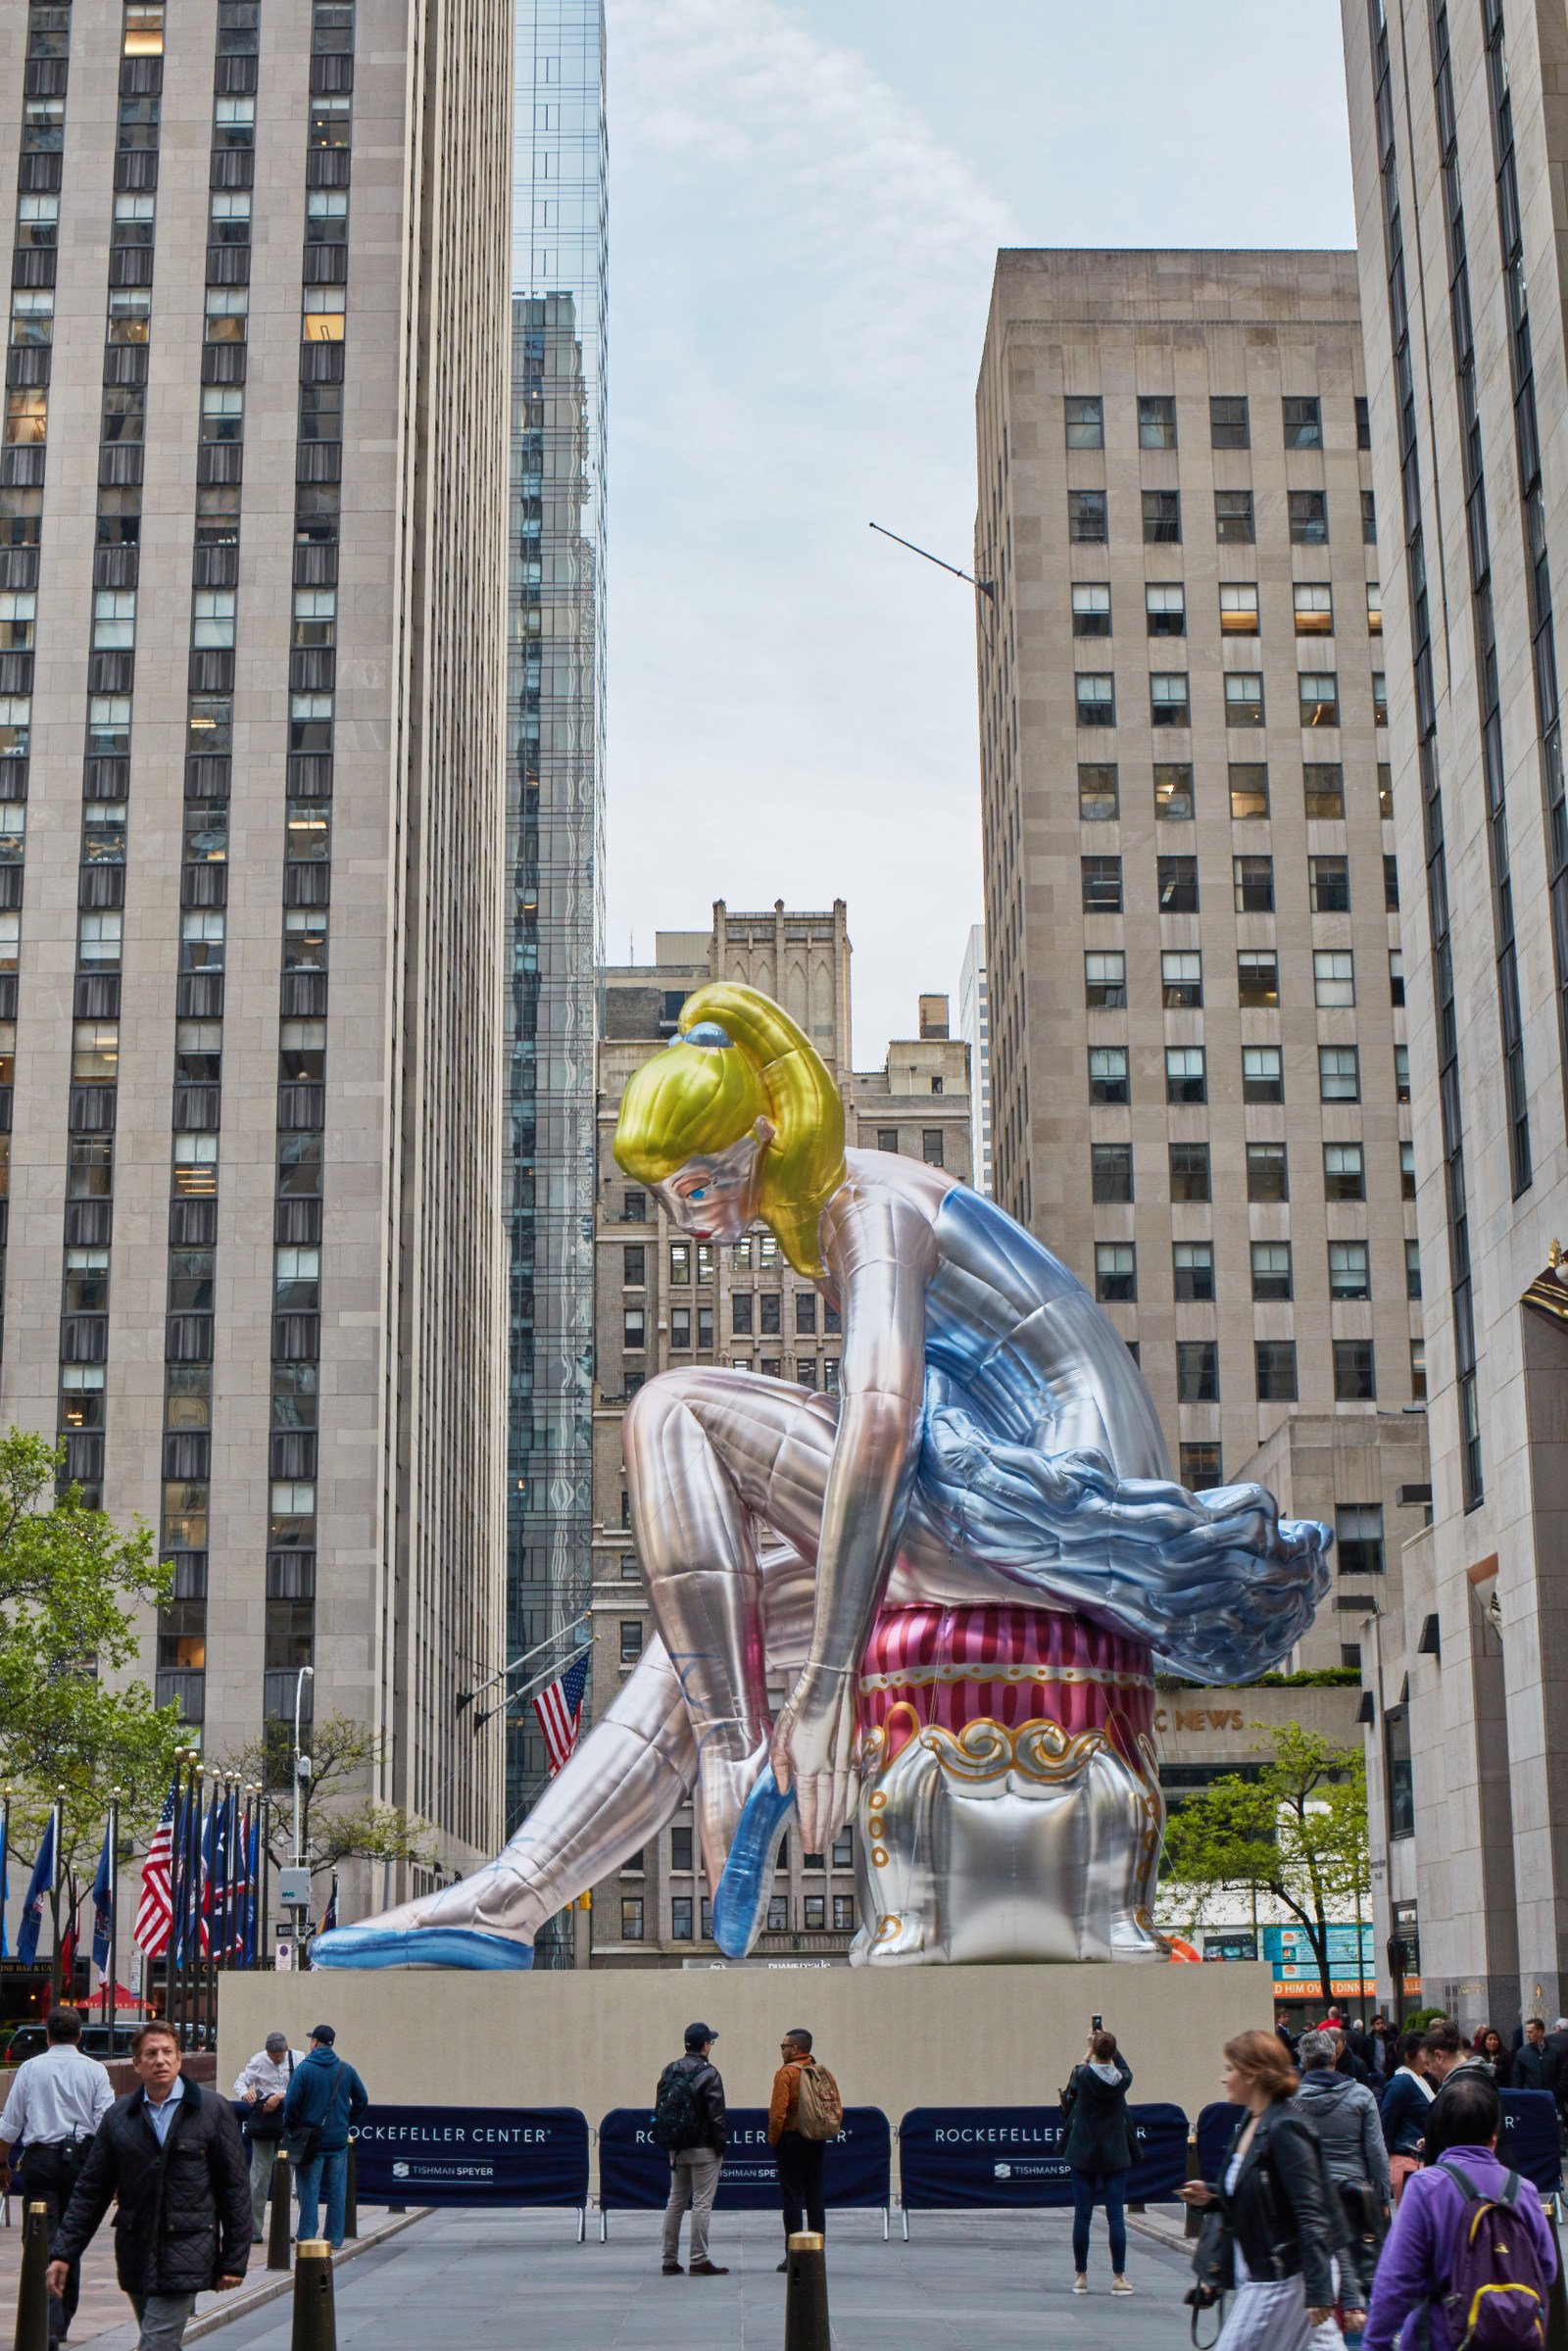 34 Amazing Public Art Shows to See in New York This Summer | artnet News